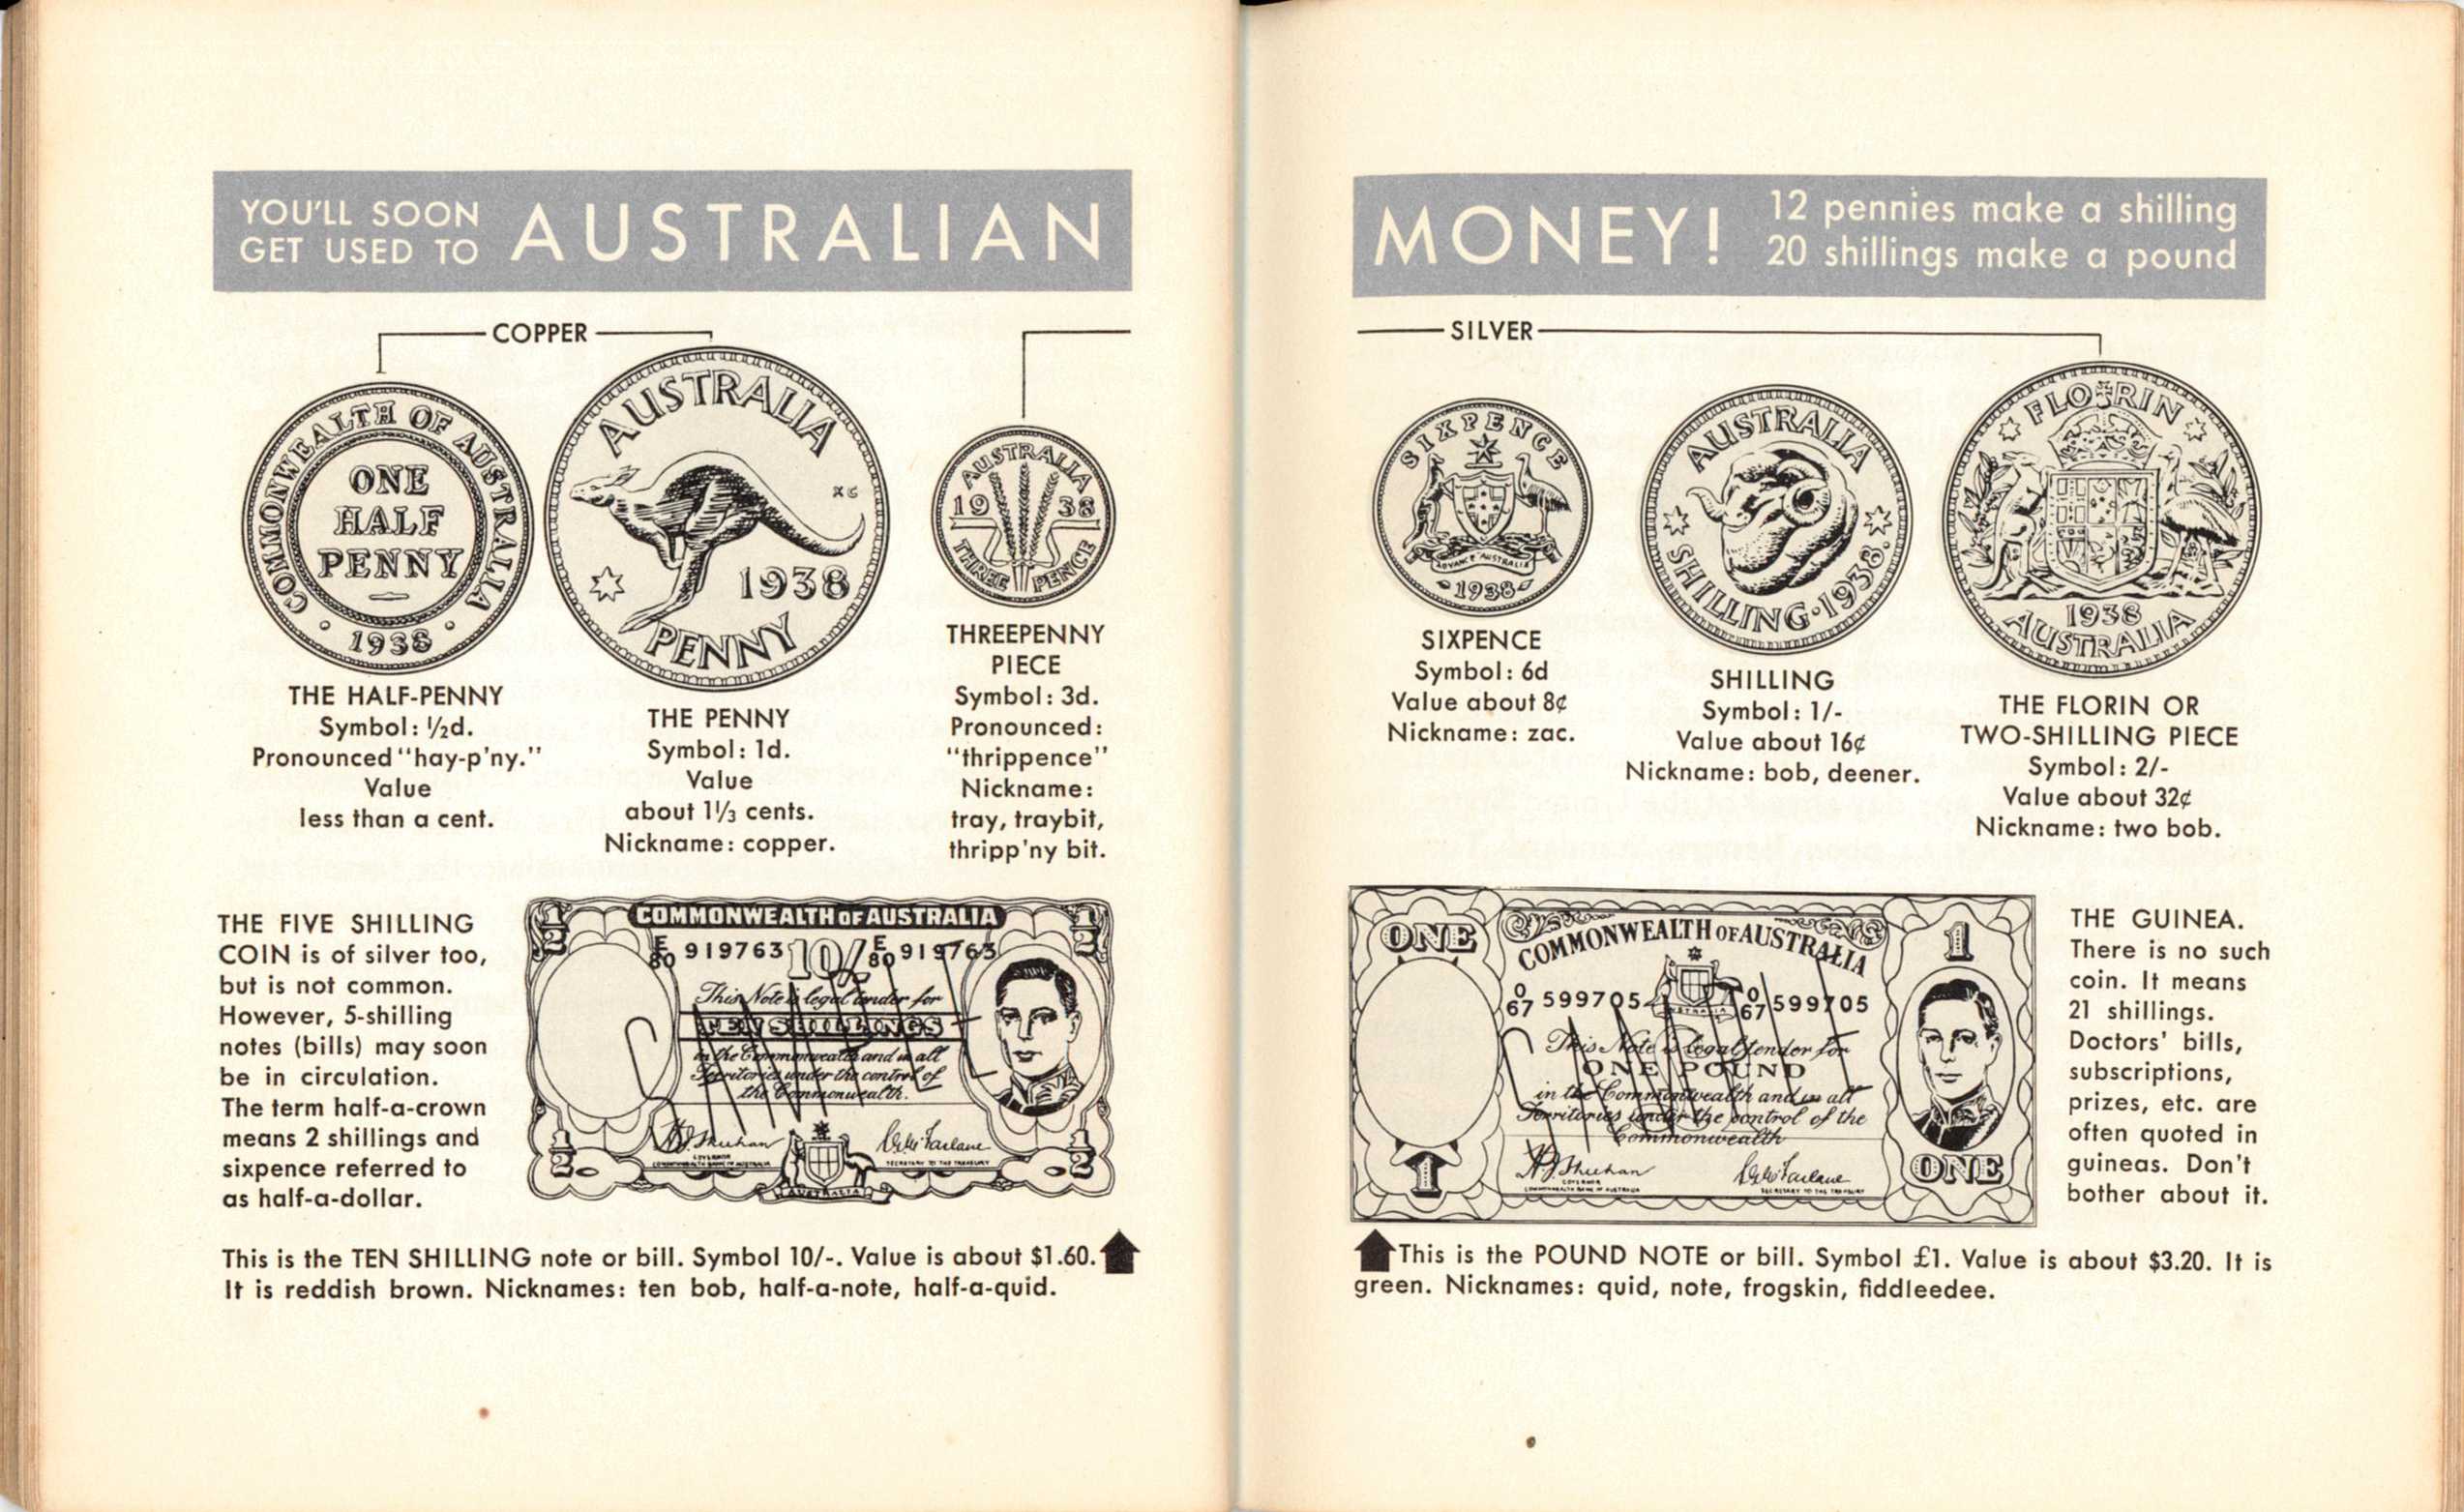 Pocket Guide to Australia page 41